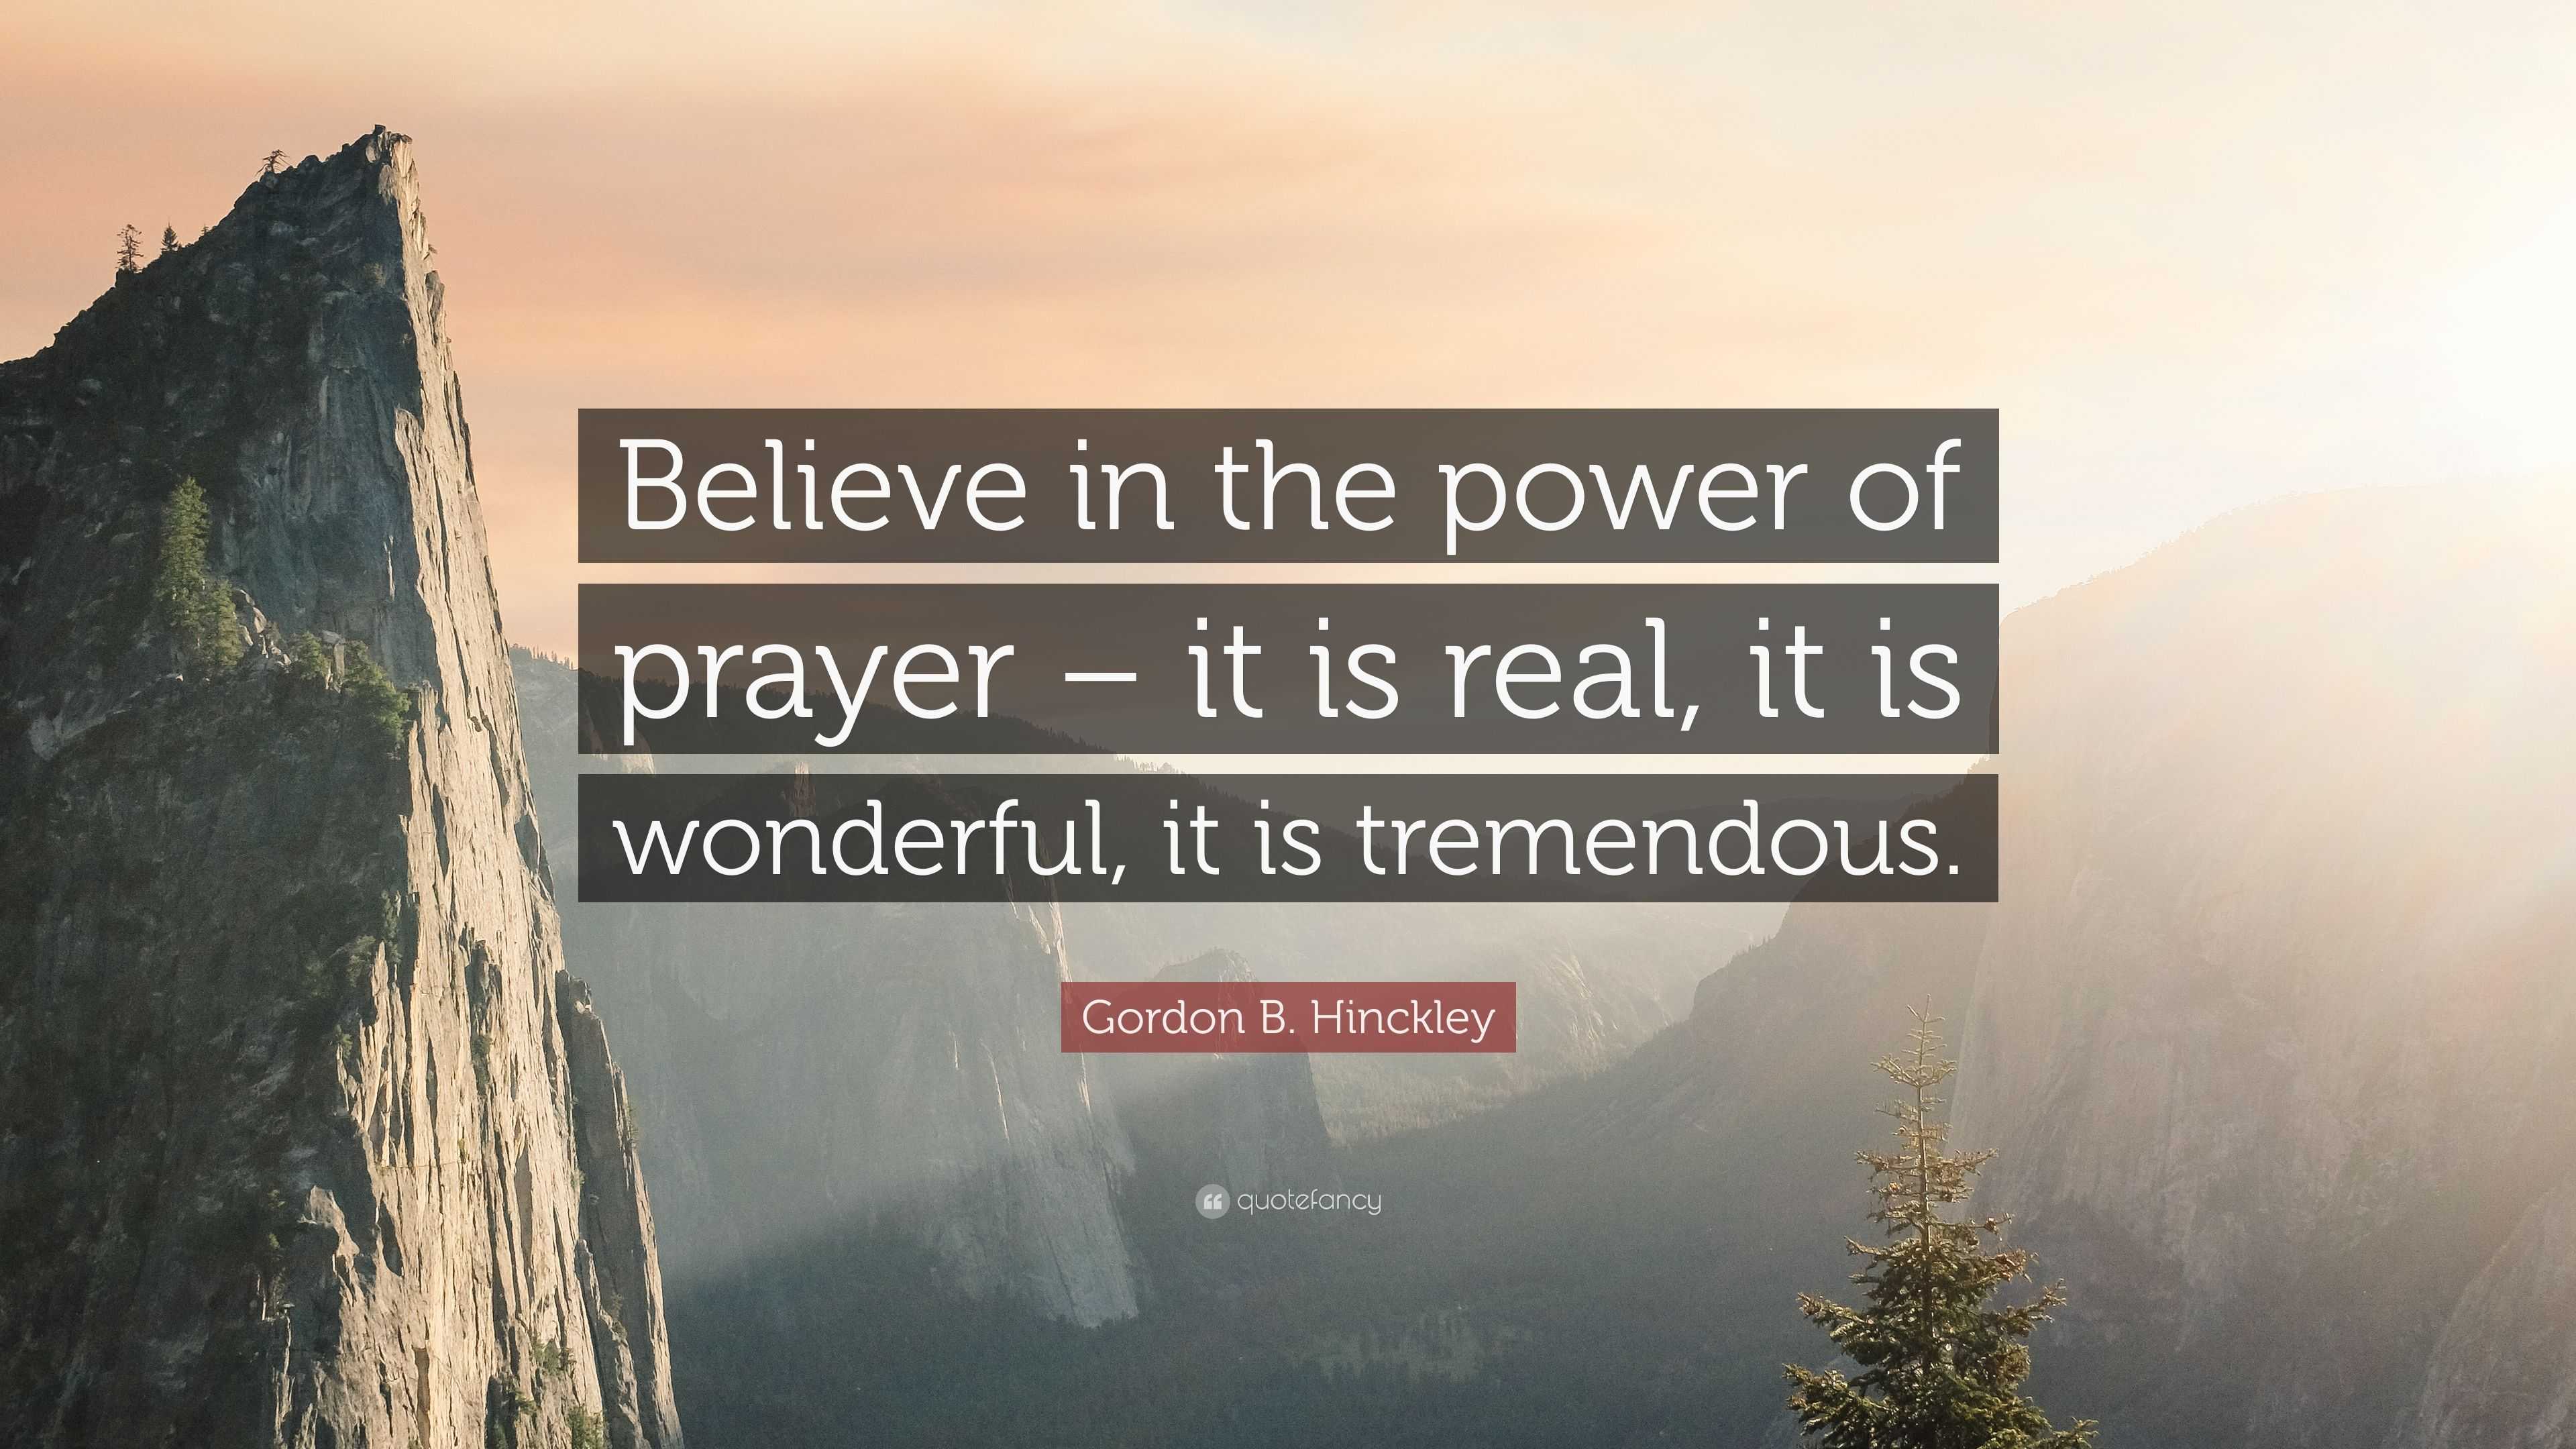 Gordon B. Hinckley Quote: “Believe in the power of prayer – it is real ...
